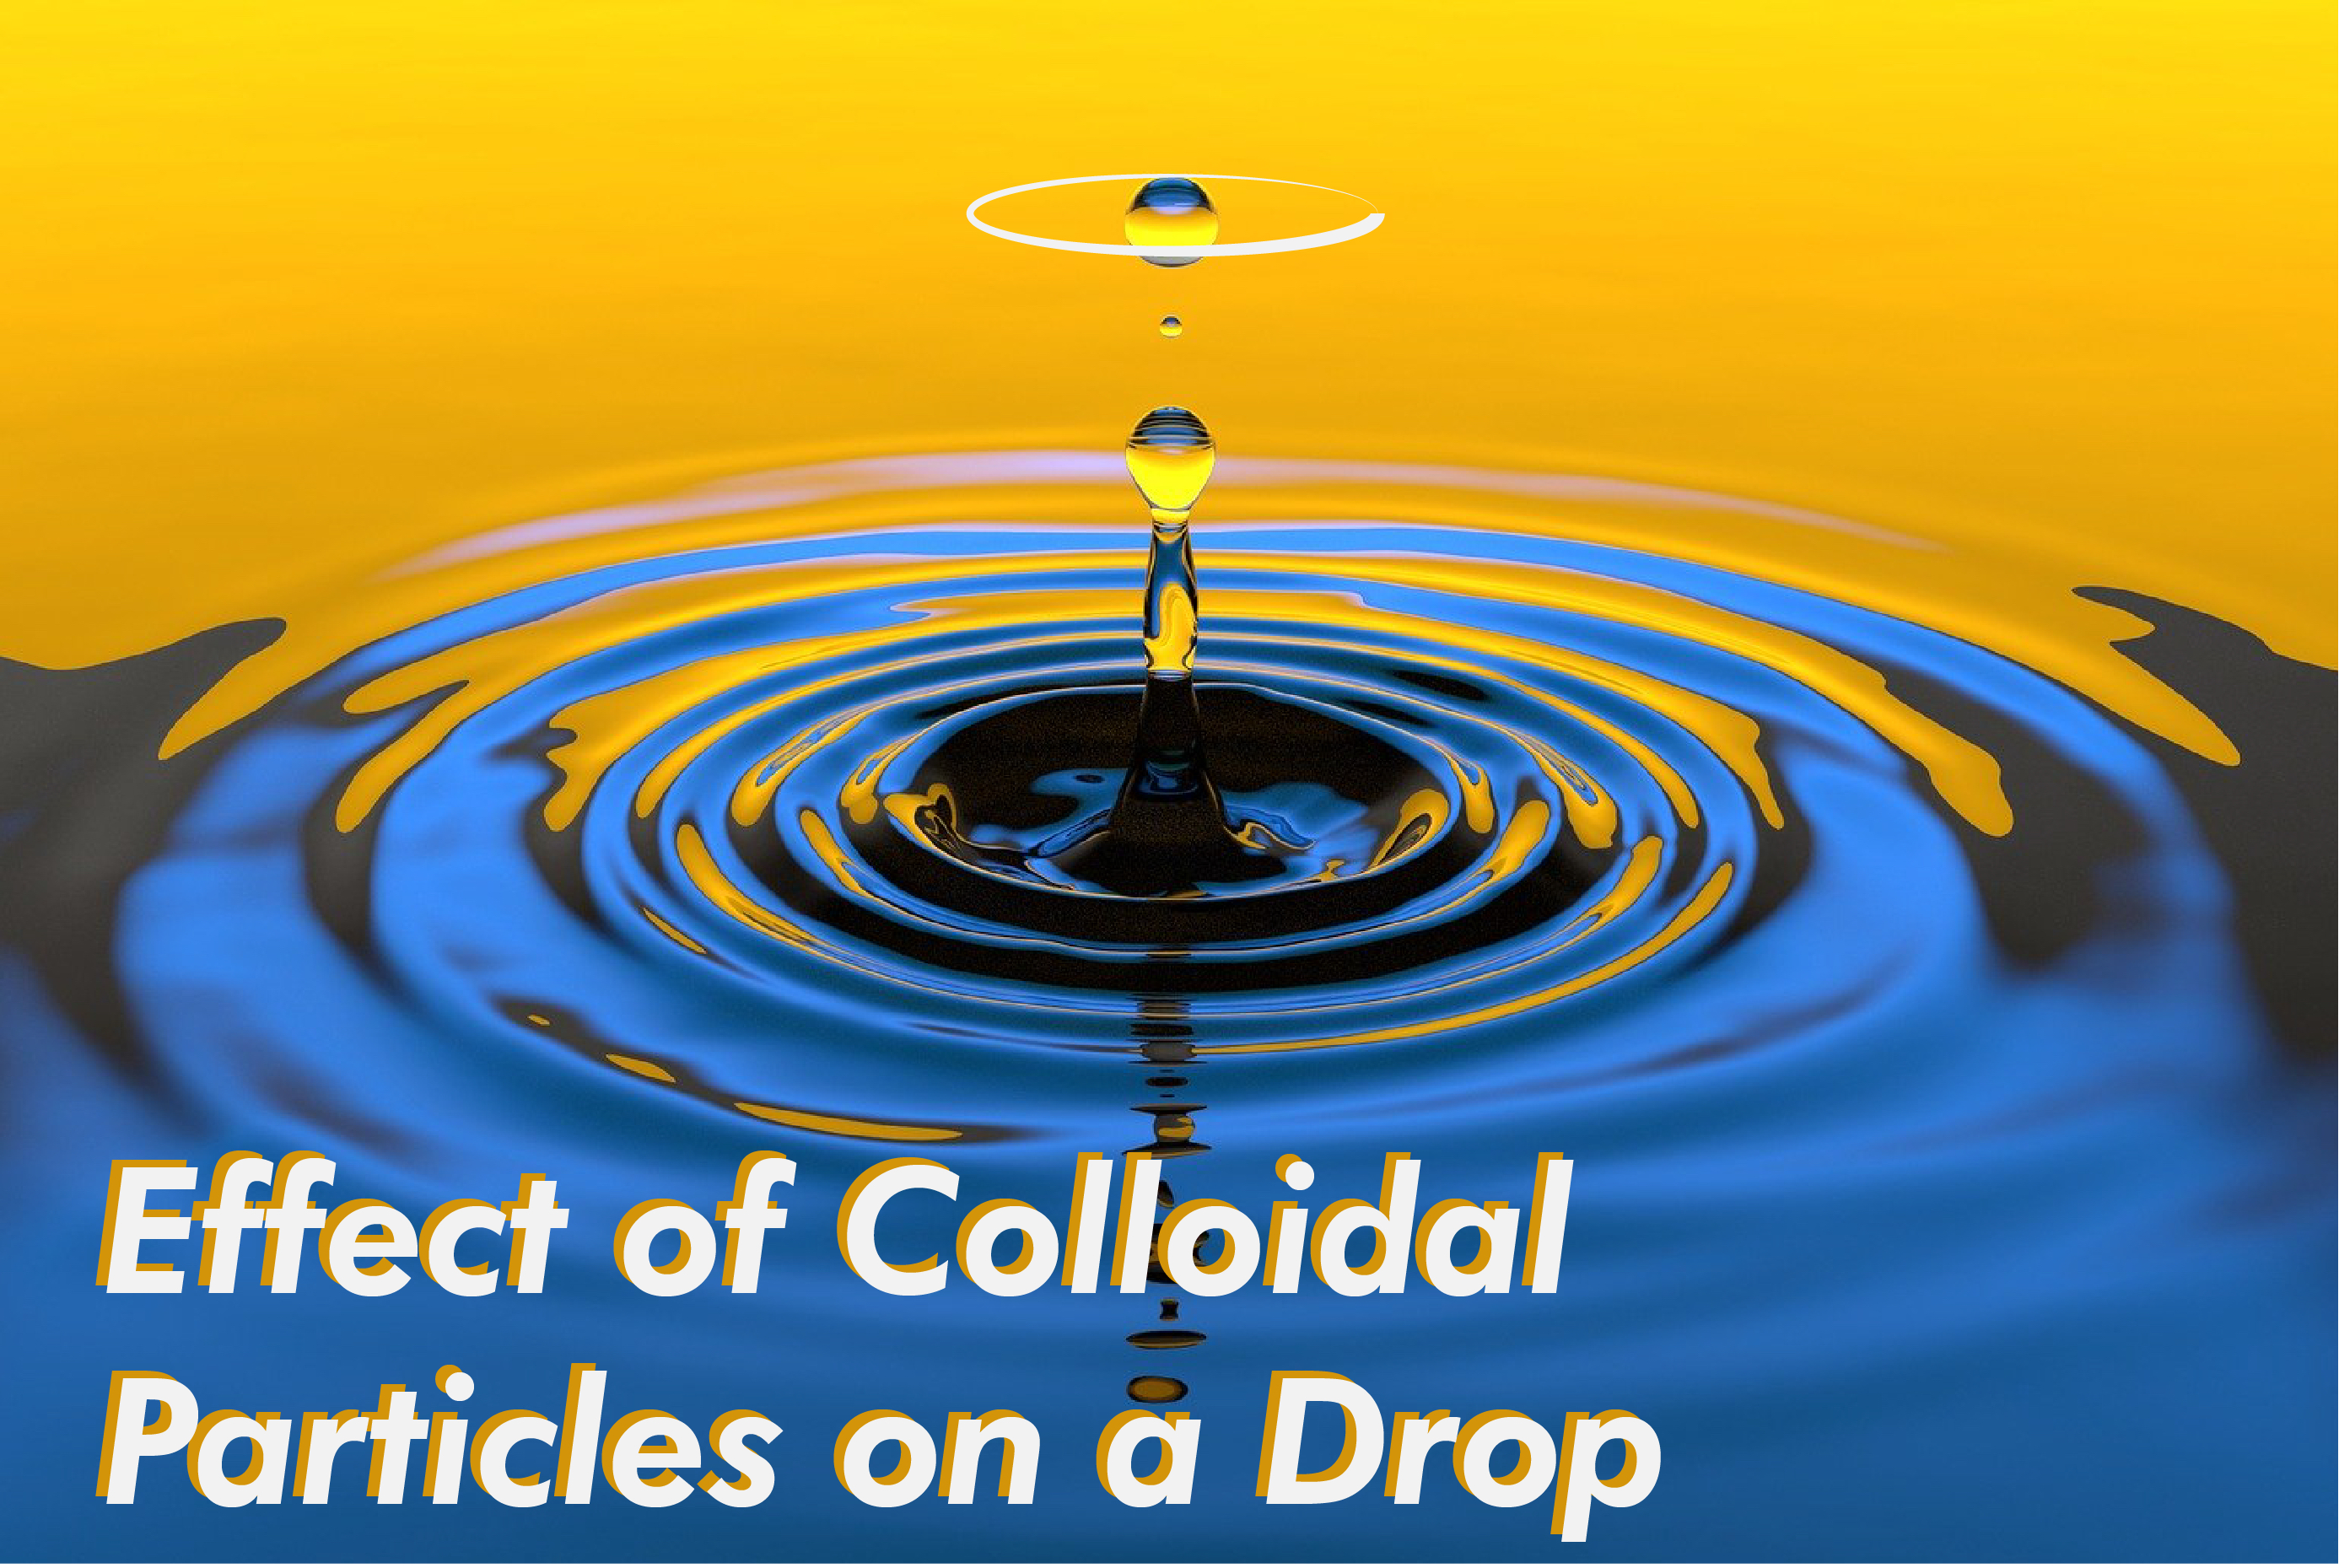 Effect of Colloidal Particles on a Drop